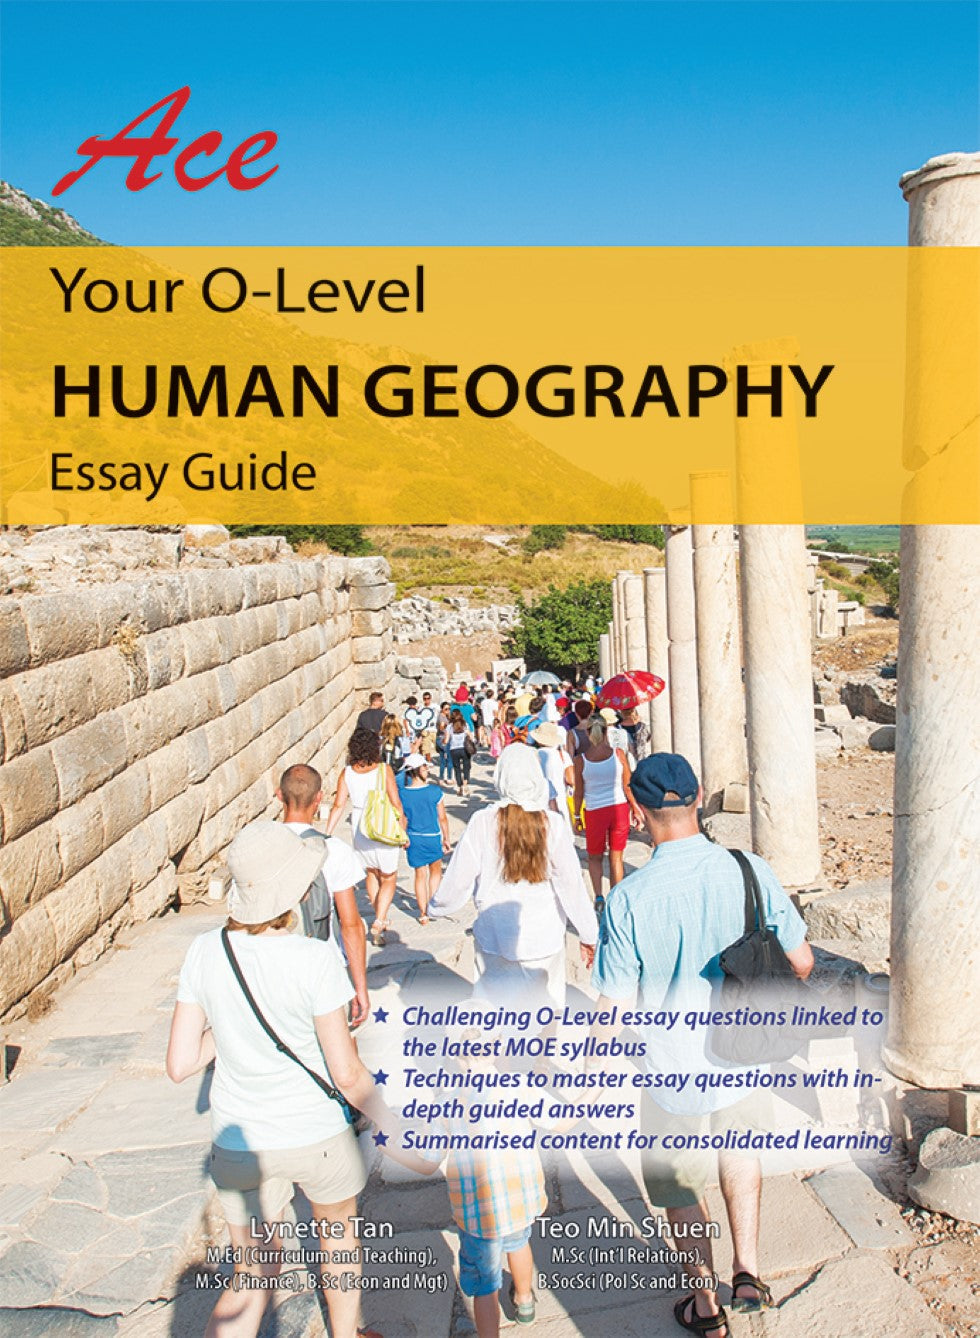 Guide　O-Level　Ace　Your　Essay　Human　Geography